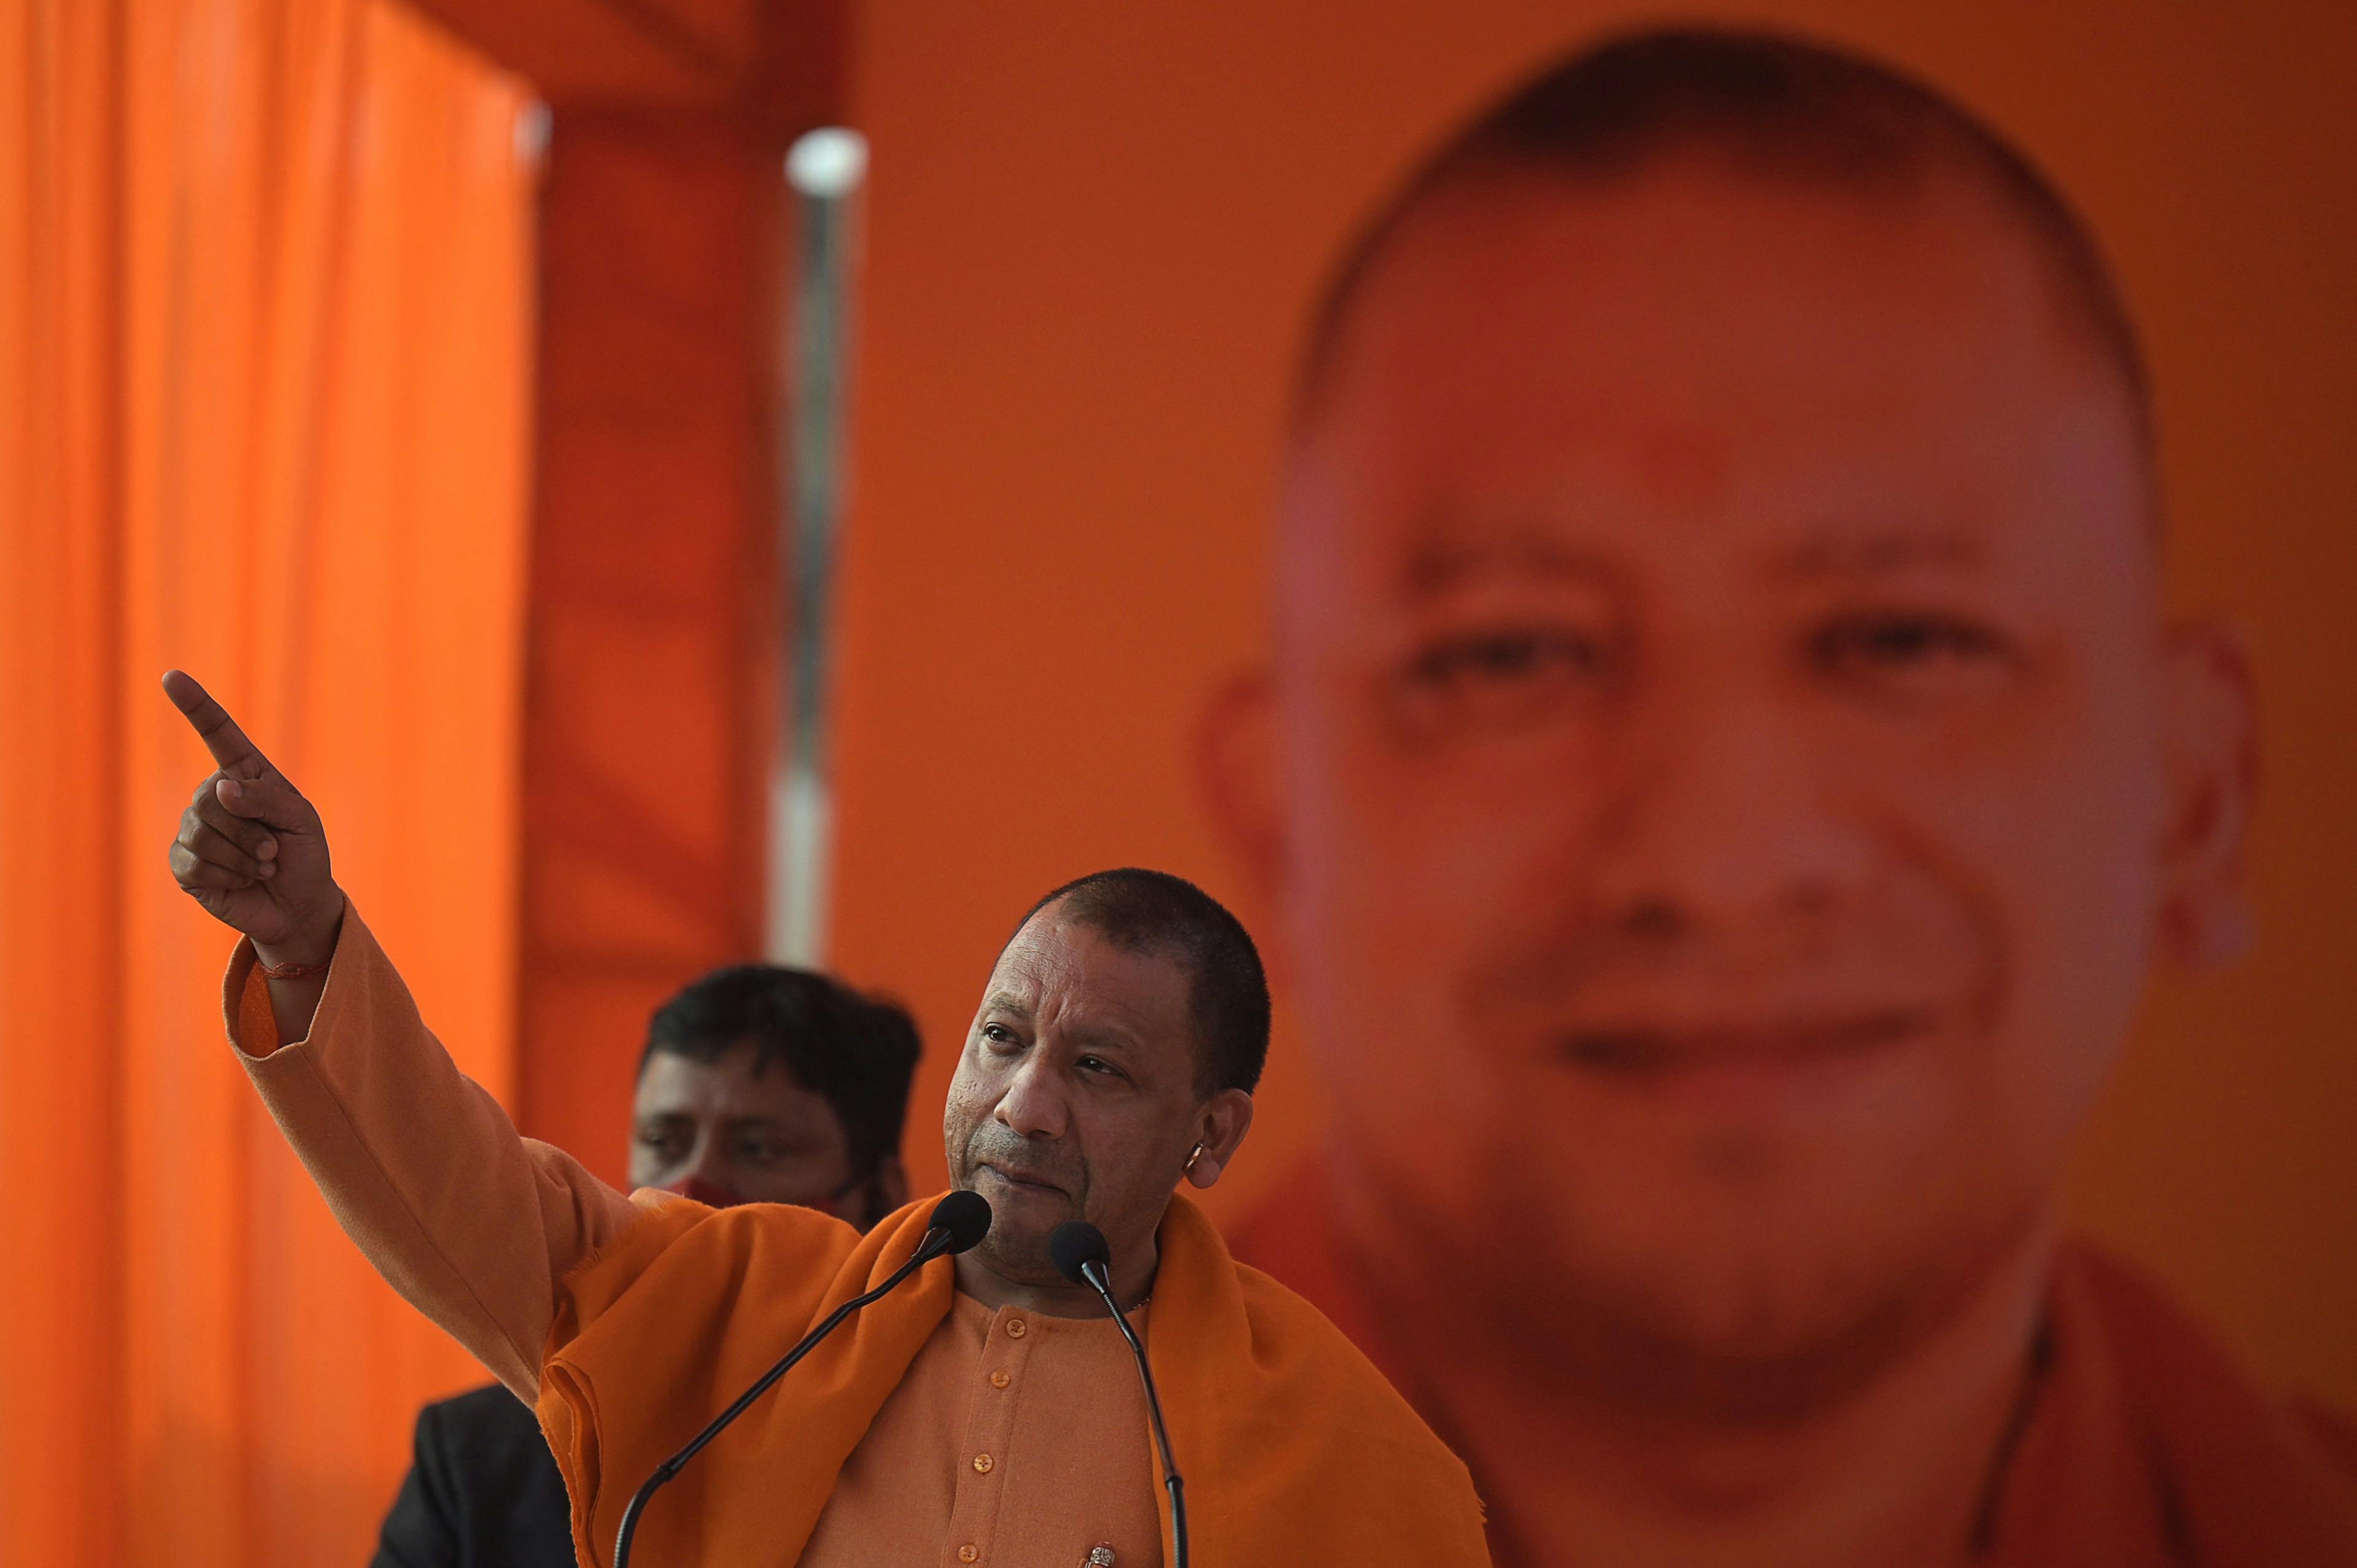 Chief Minister of Uttar Pradesh Yogi Adityanath gestures as he speaks during an election campaign rally in Modinagar in Ghaziabad district, some 45km east of New Delhi, on February 1, 2022. (MONEY SHARMA/AFP via Getty Images)